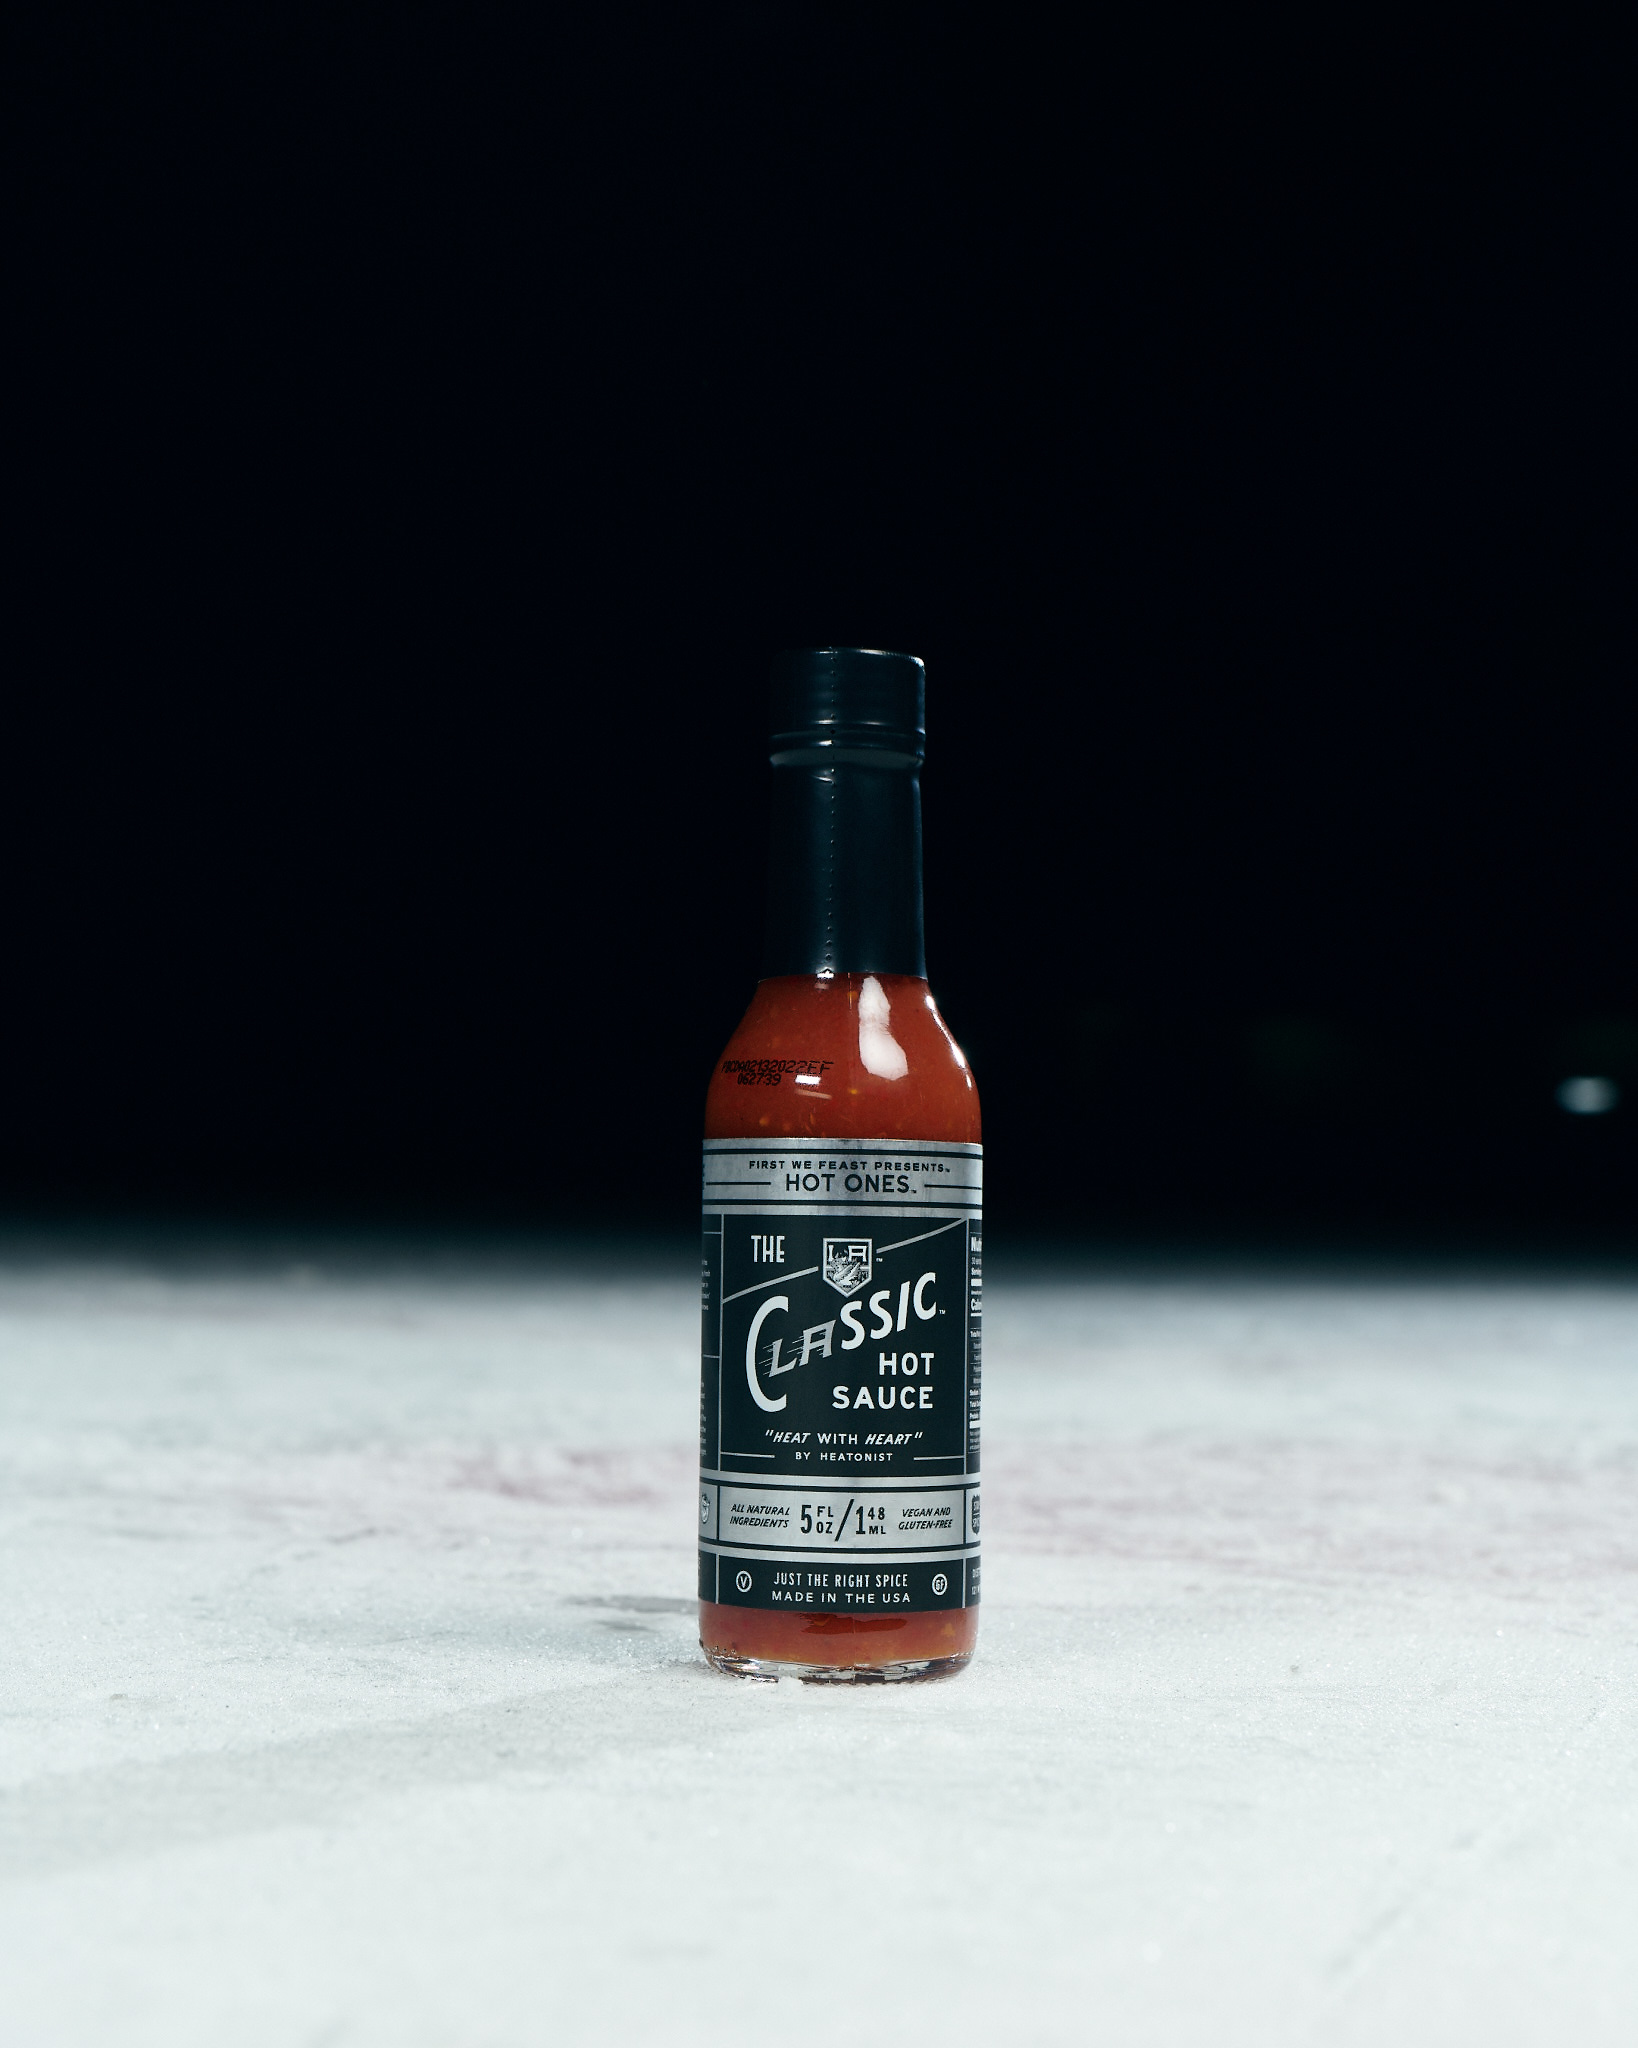 LA Kings and First We Feast's 'Hot Ones' Reveal Exclusive New